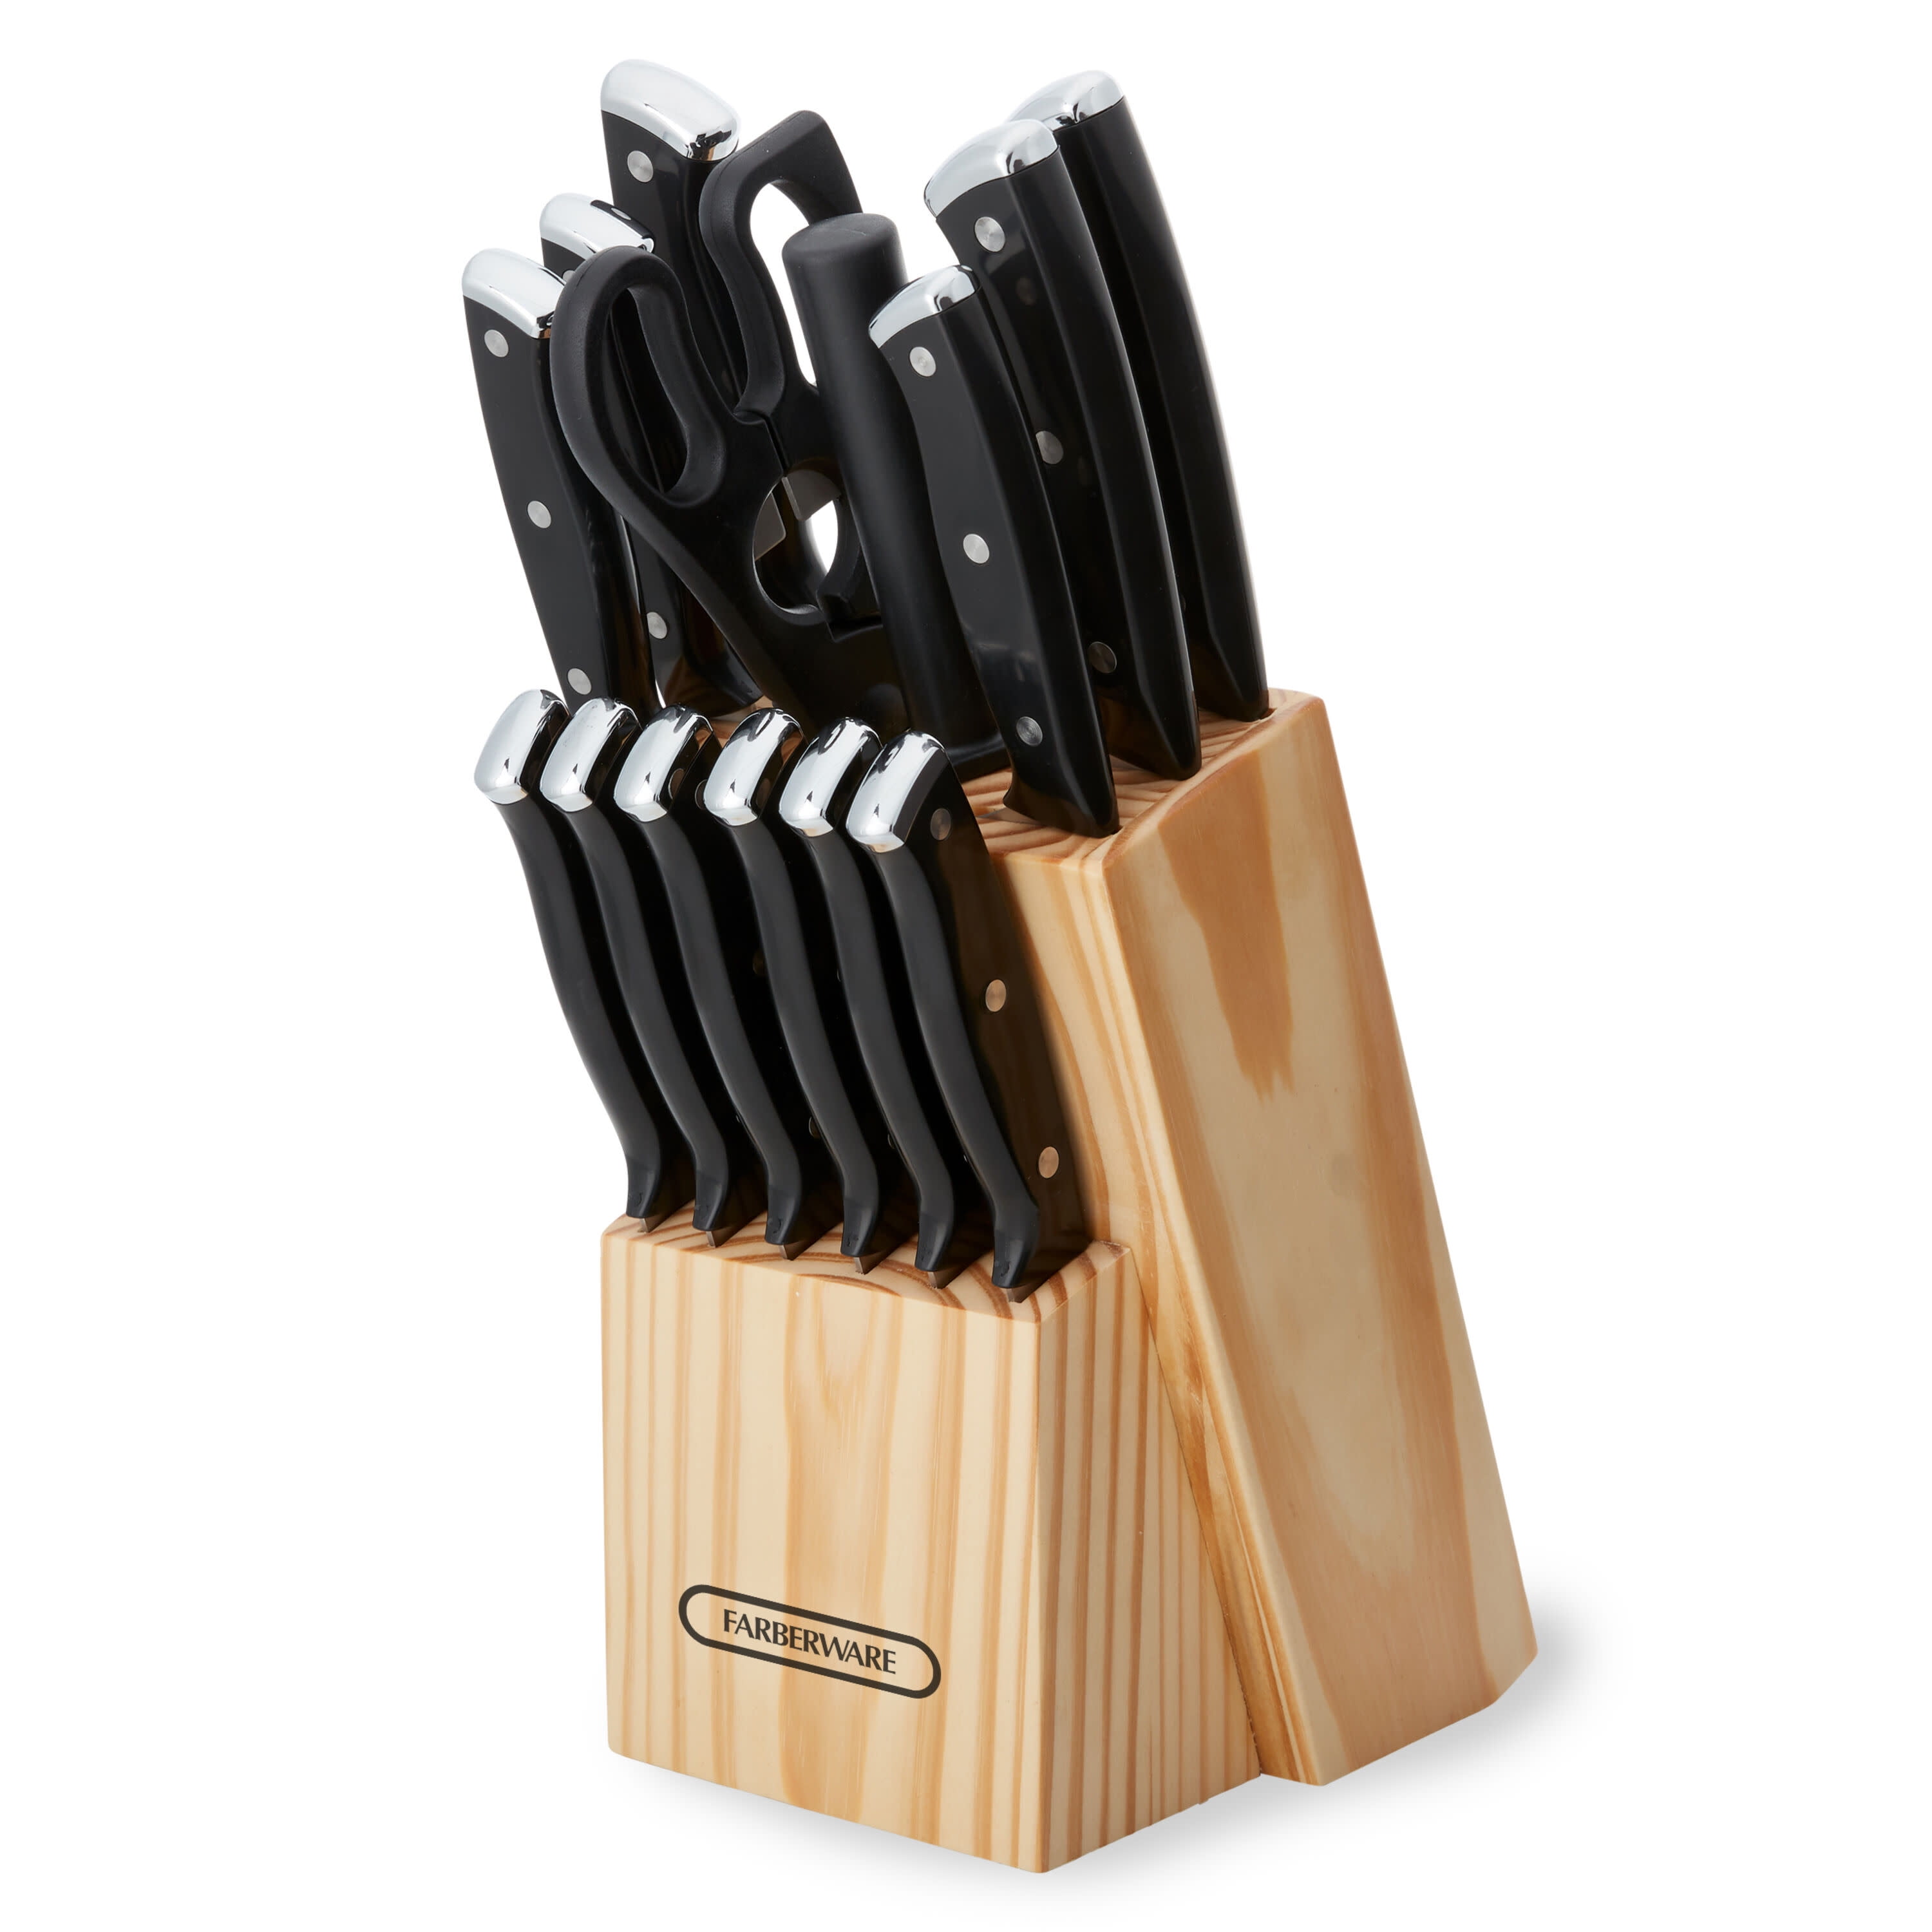 Farberware 15-Piece Triple Riveted Acacia Knife Block Set, High  Carbon-Stainless Steel Kitchen Knives with Ergonomic Handles, Razor-Sharp  Knife Set